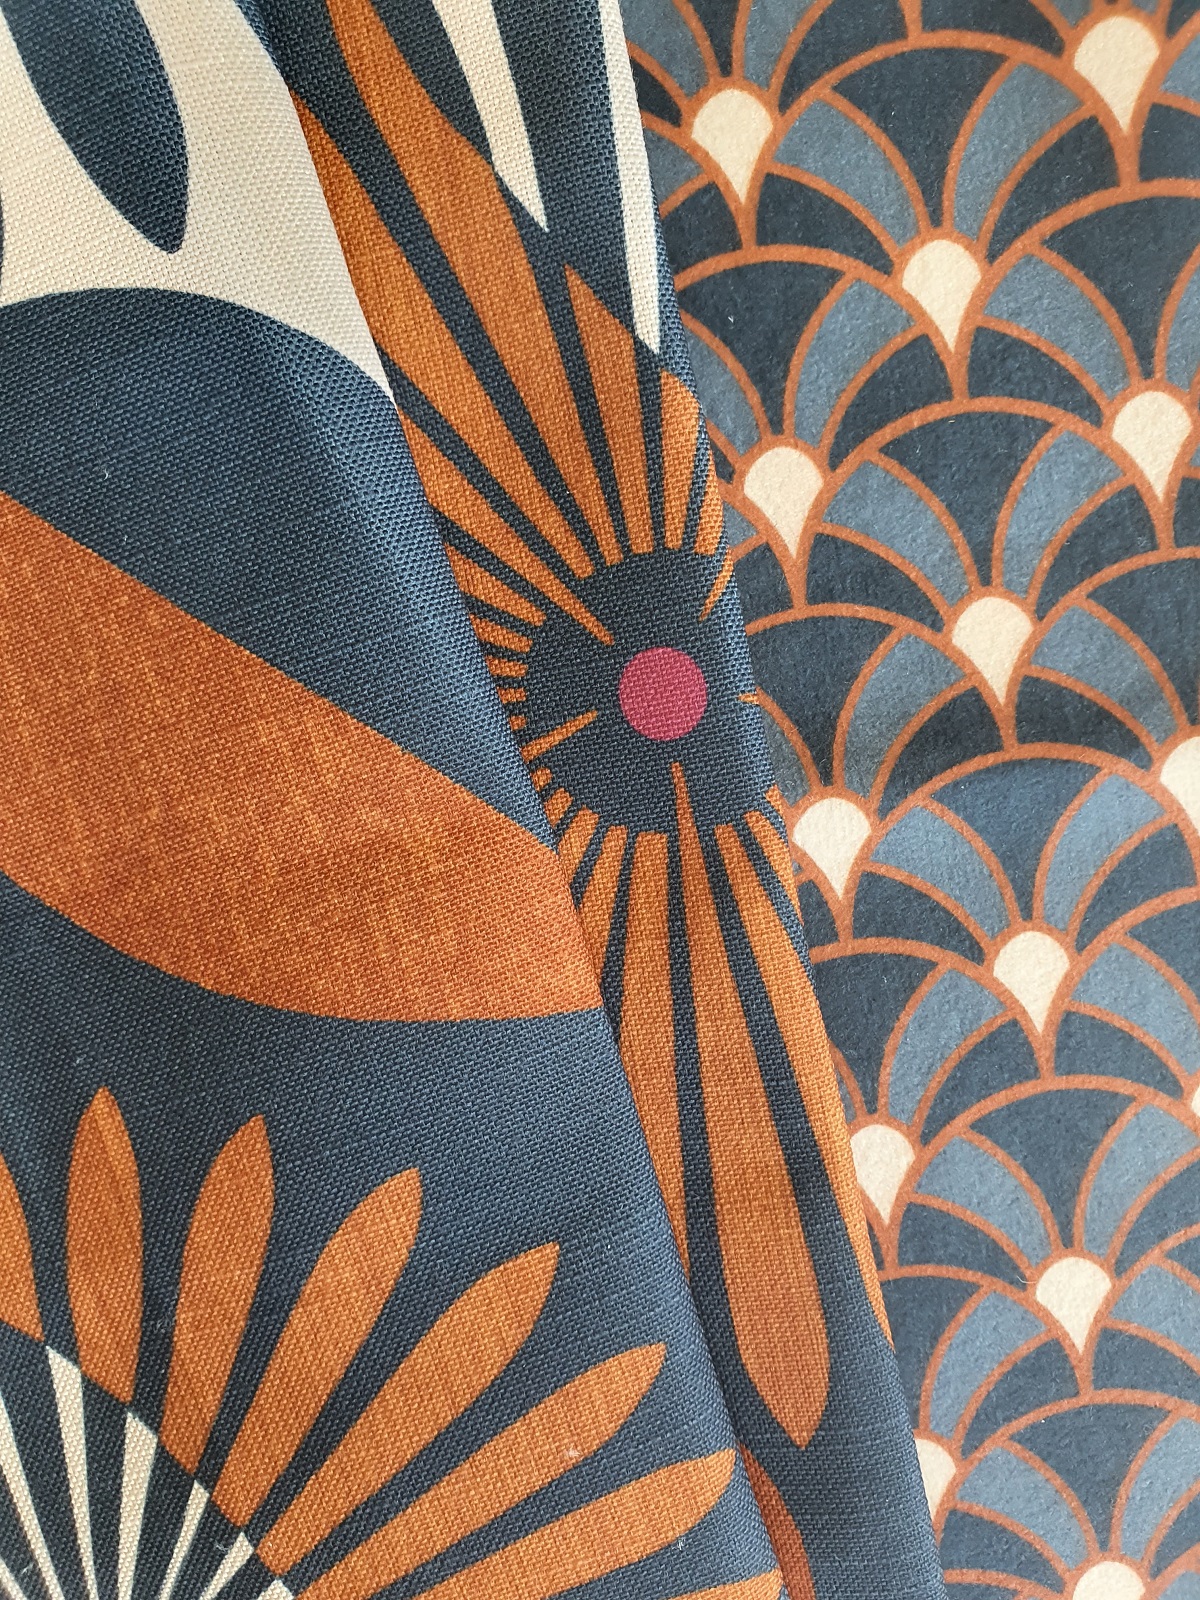 skopos fabrics from the Kimono and flamingo collections in blue and orange colourway